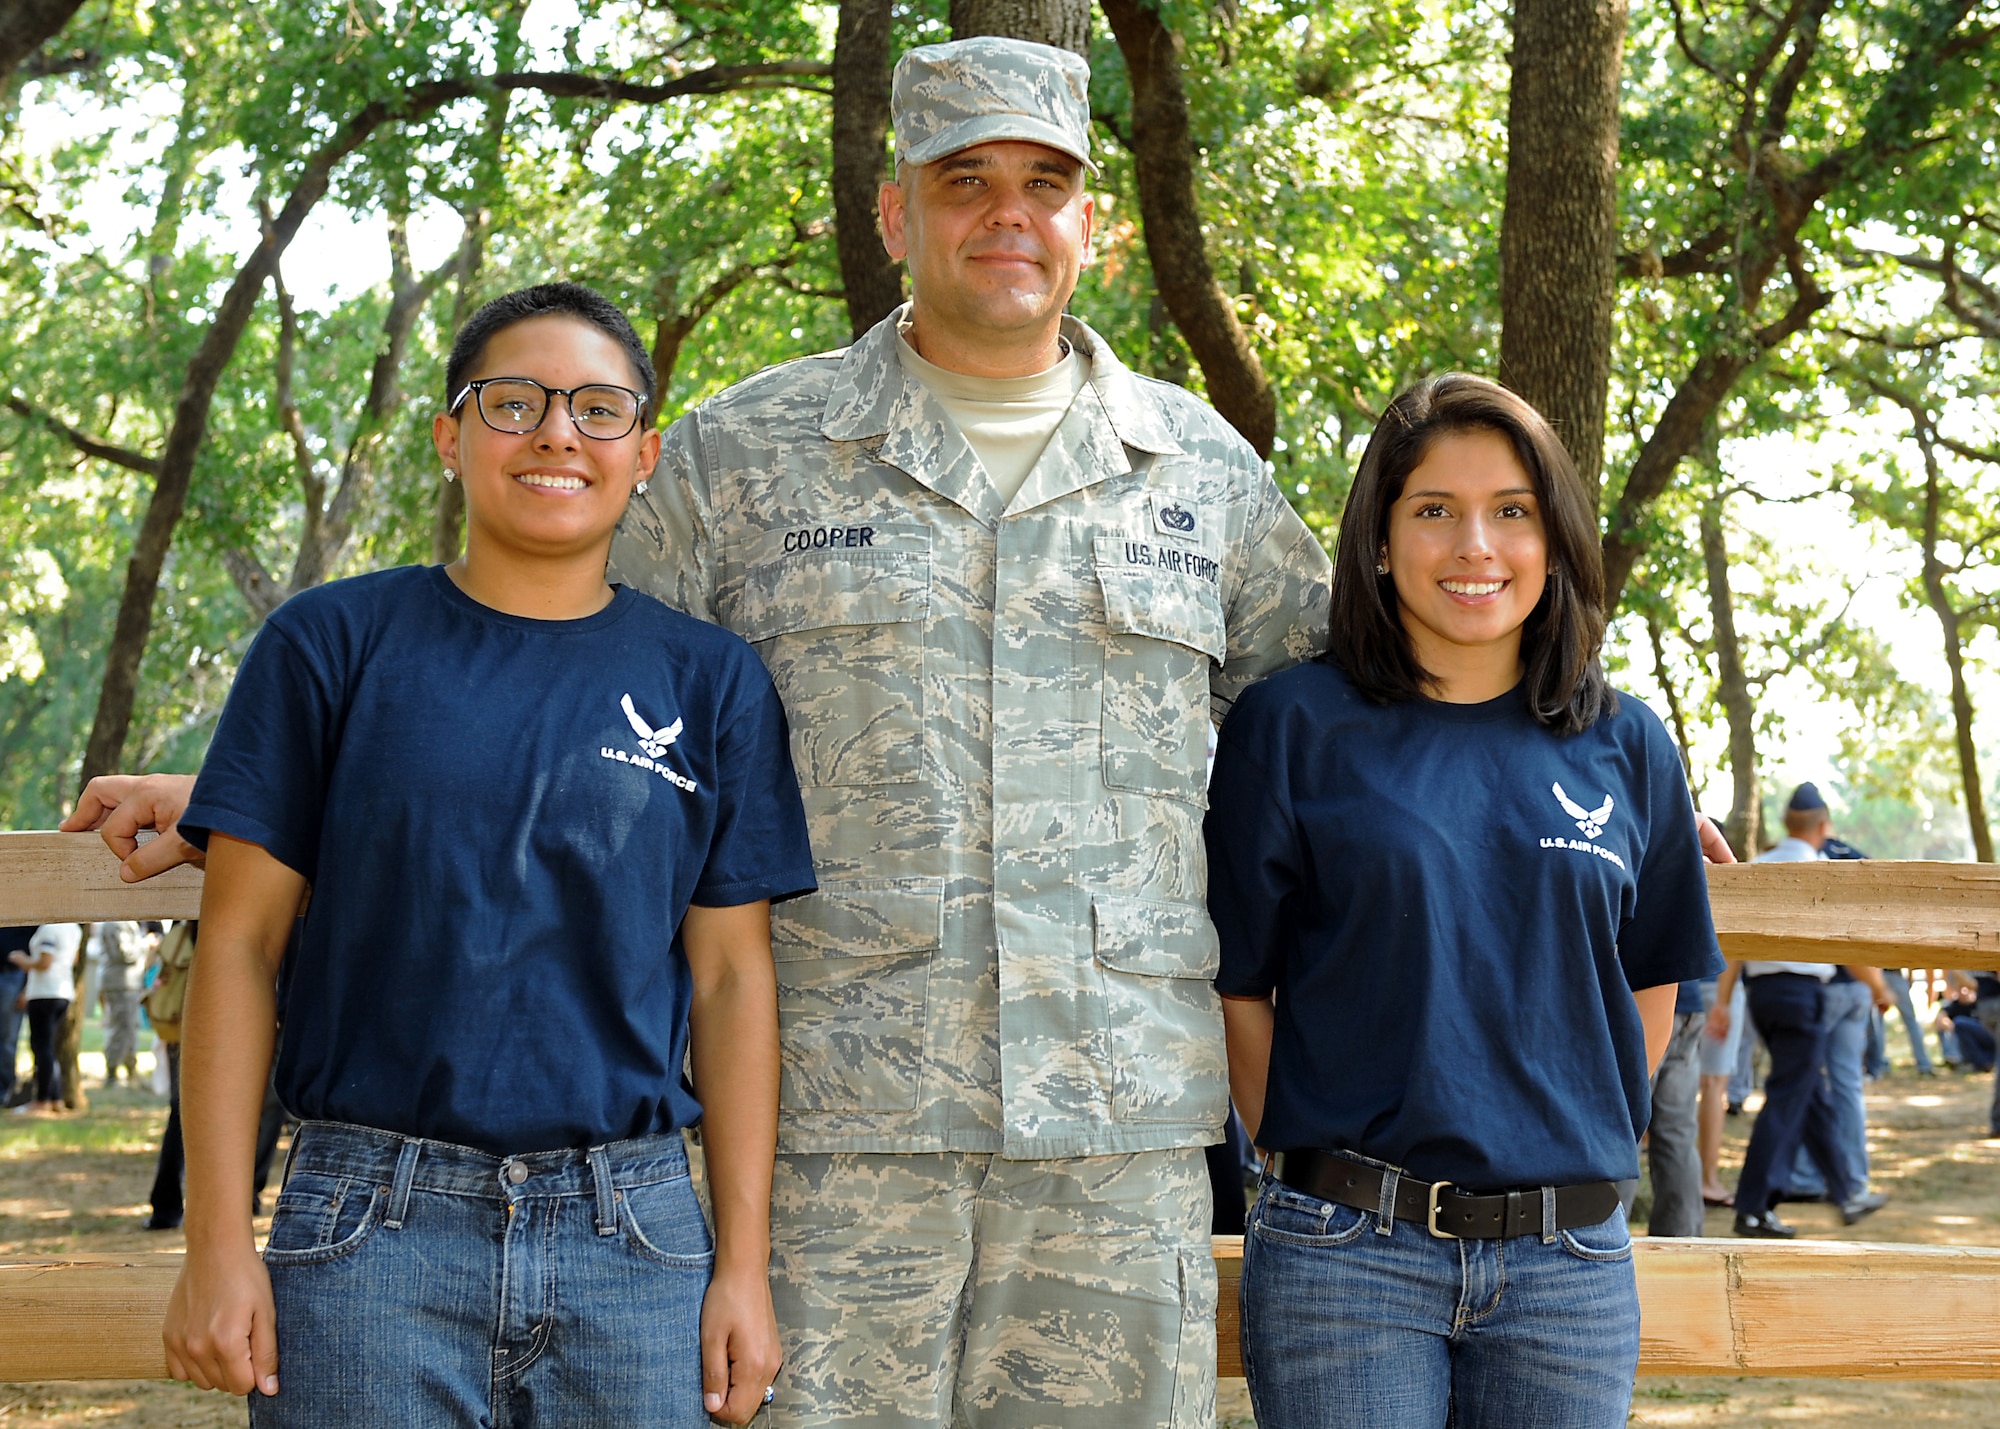 U.S. Air Force Tech. Sgt. Craig Cooper, 7th Civil Engineer Squadron, Dyess Air Force Base, Texas, stands with his stepdaughters Elizabeth Martinez, left, and Katherine Martinez July 4, 2013, outside of Rangers Ballpark in Arlington, Texas. Cooper and his daughters traveled to Arlington to participate in an Air Force enlistment ceremony on the Texas Rangers’ baseball field. (U.S. Air Force photo by Airman 1st Class Peter Thompson/Released) 